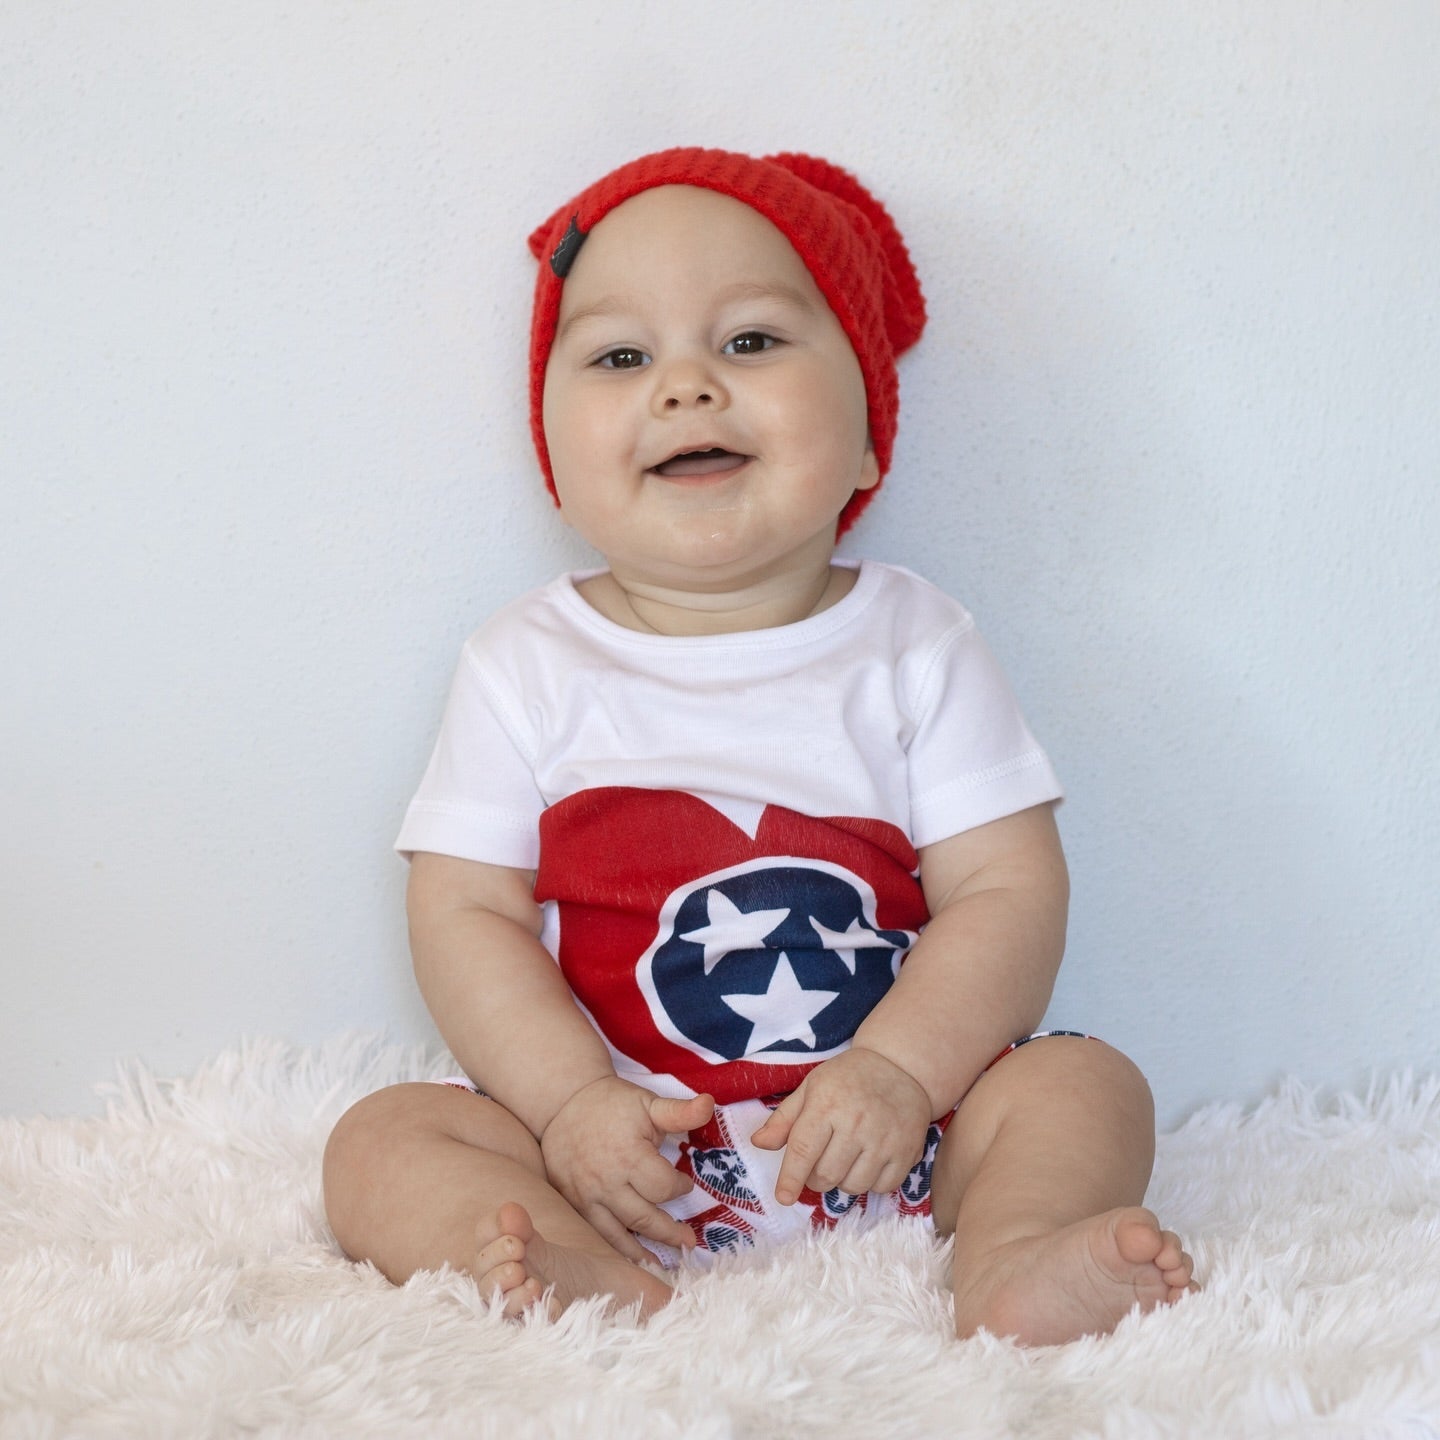 White baby onesie with a red heart and "Tennessee" text, displayed on a wooden background.